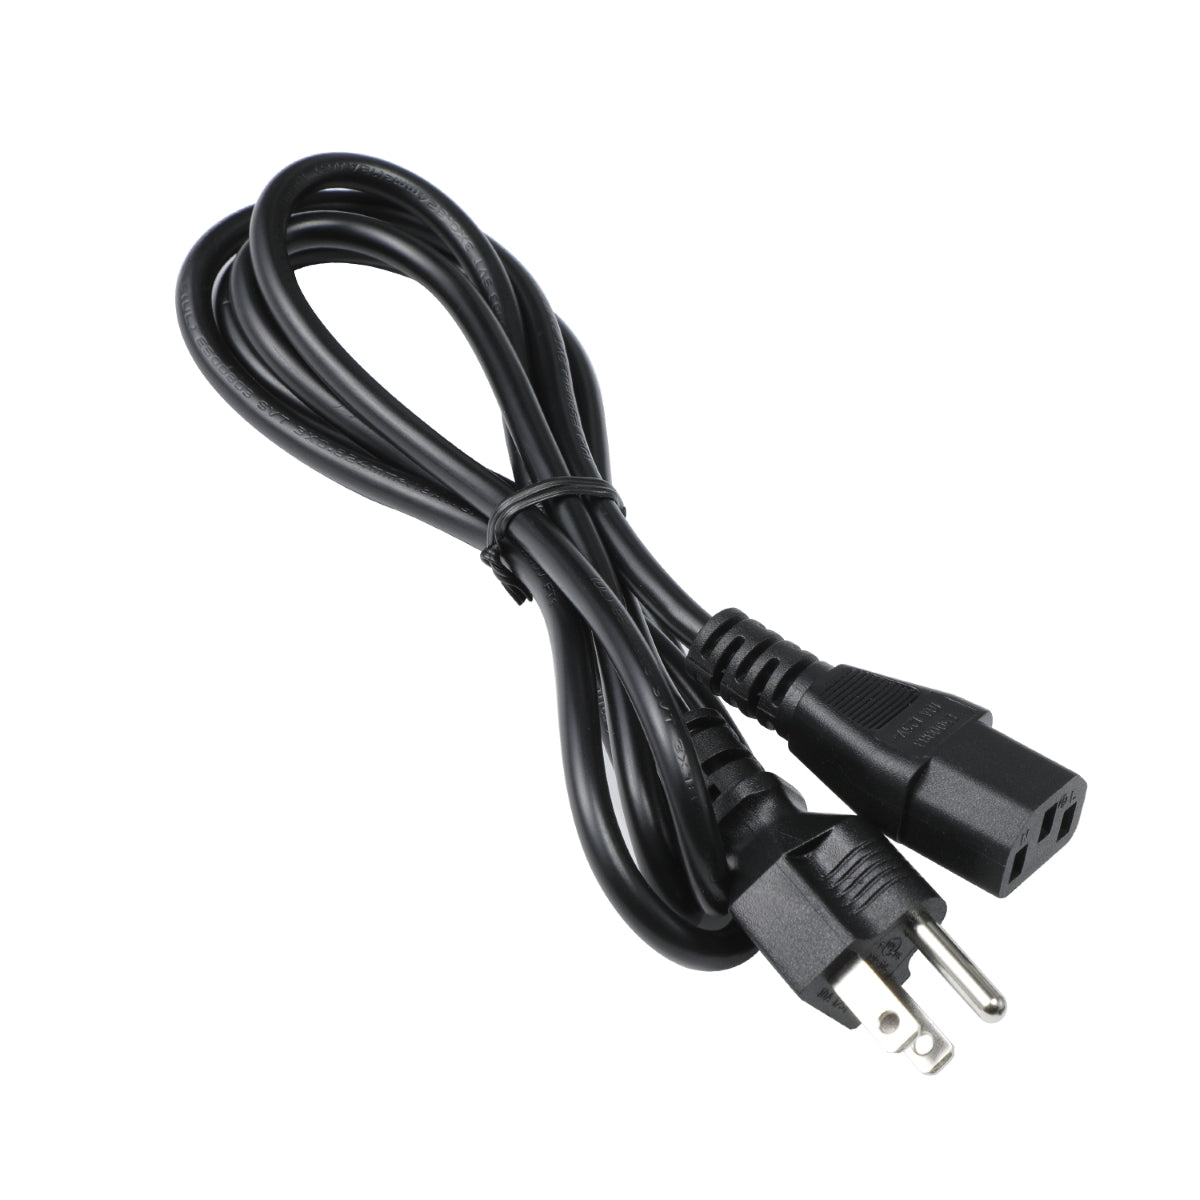 Power Cord for ViewSonic VX2452mh Monitor.